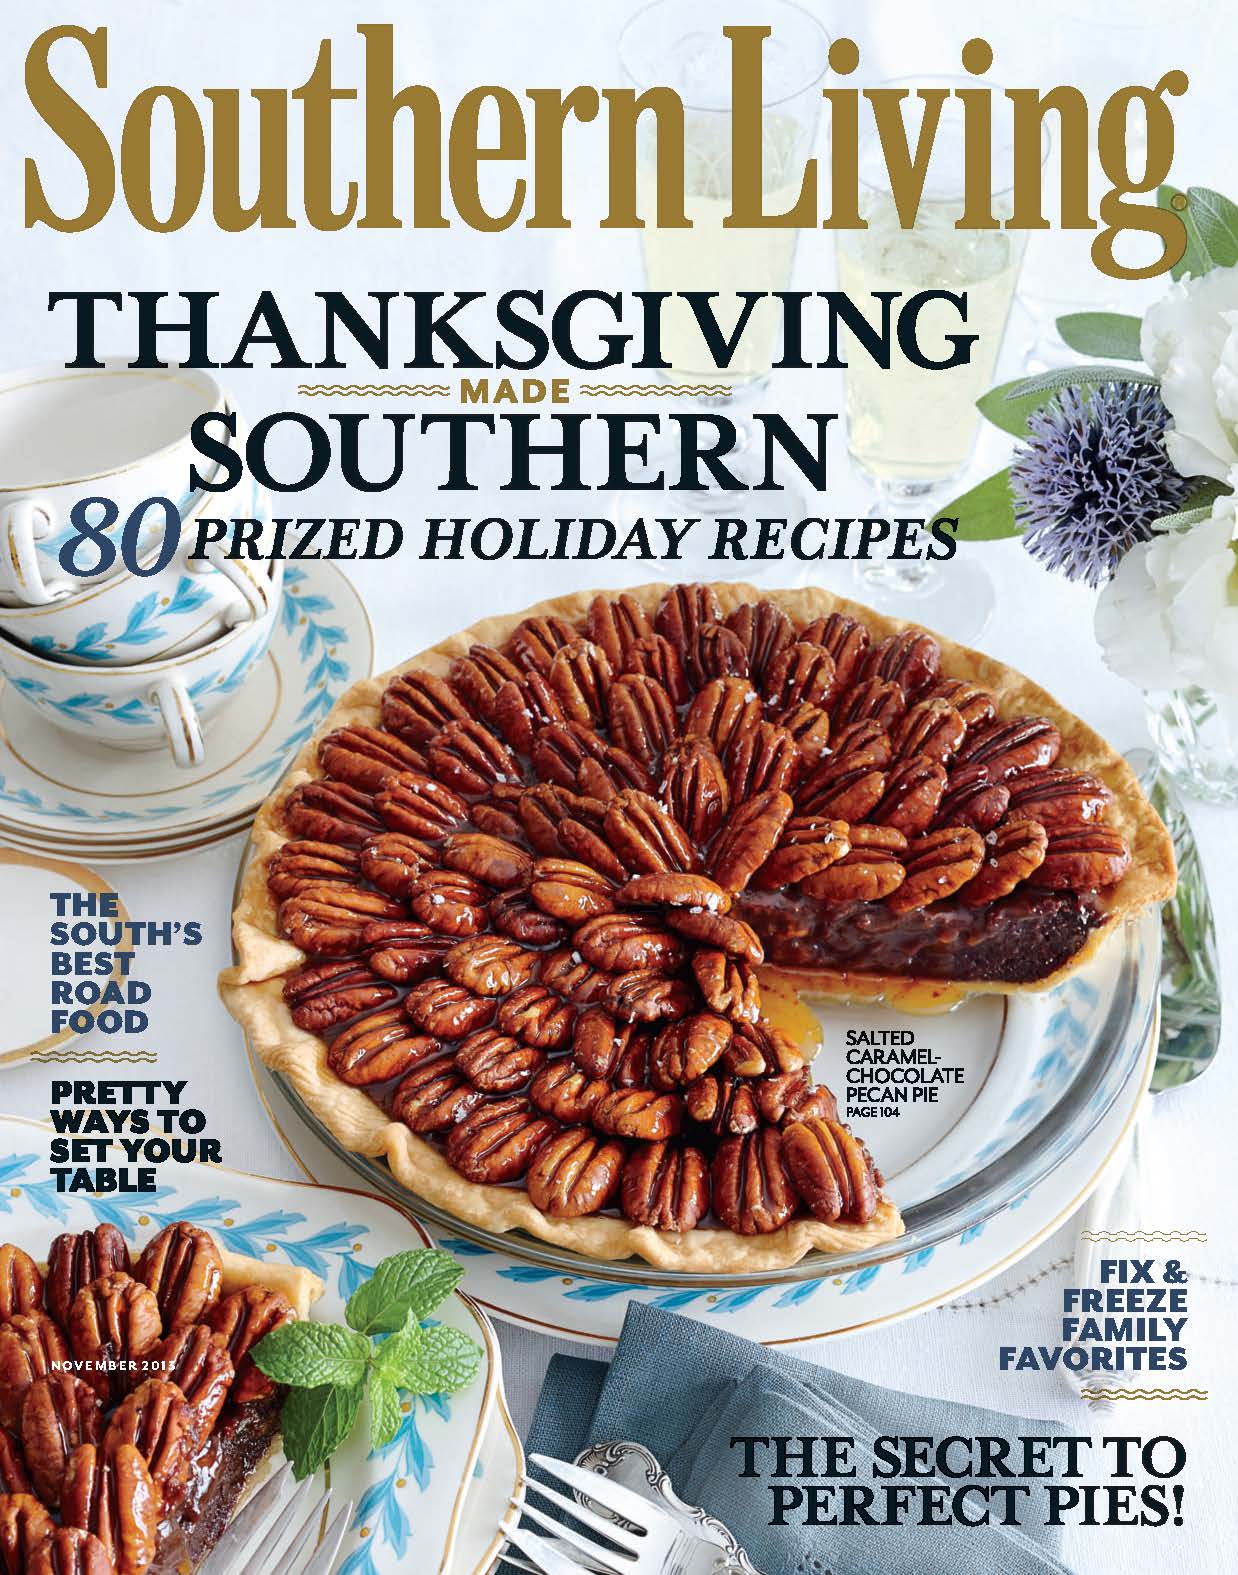 Southern Living Magazine Images Pictures   Becuo 1238x1575